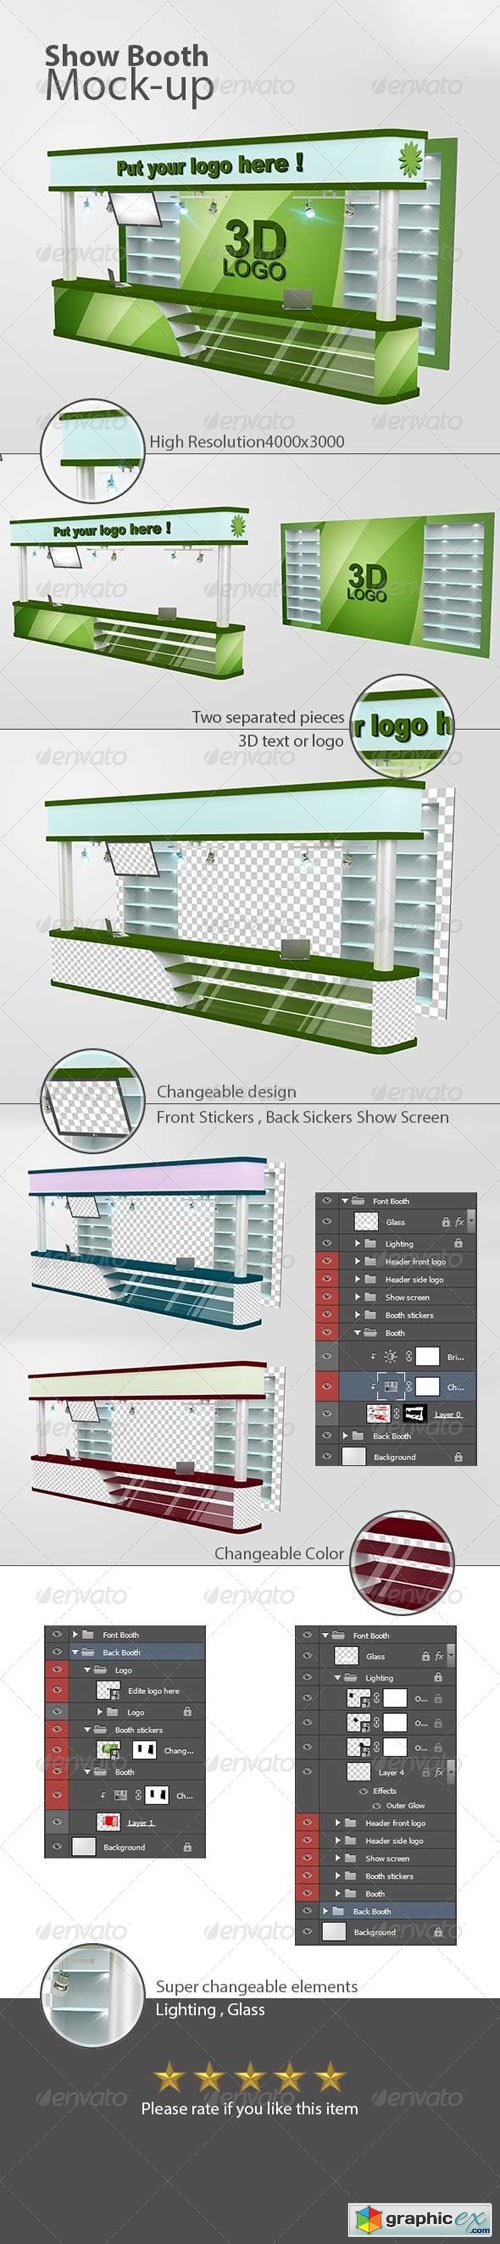 Show Booth Mock-up 7930260